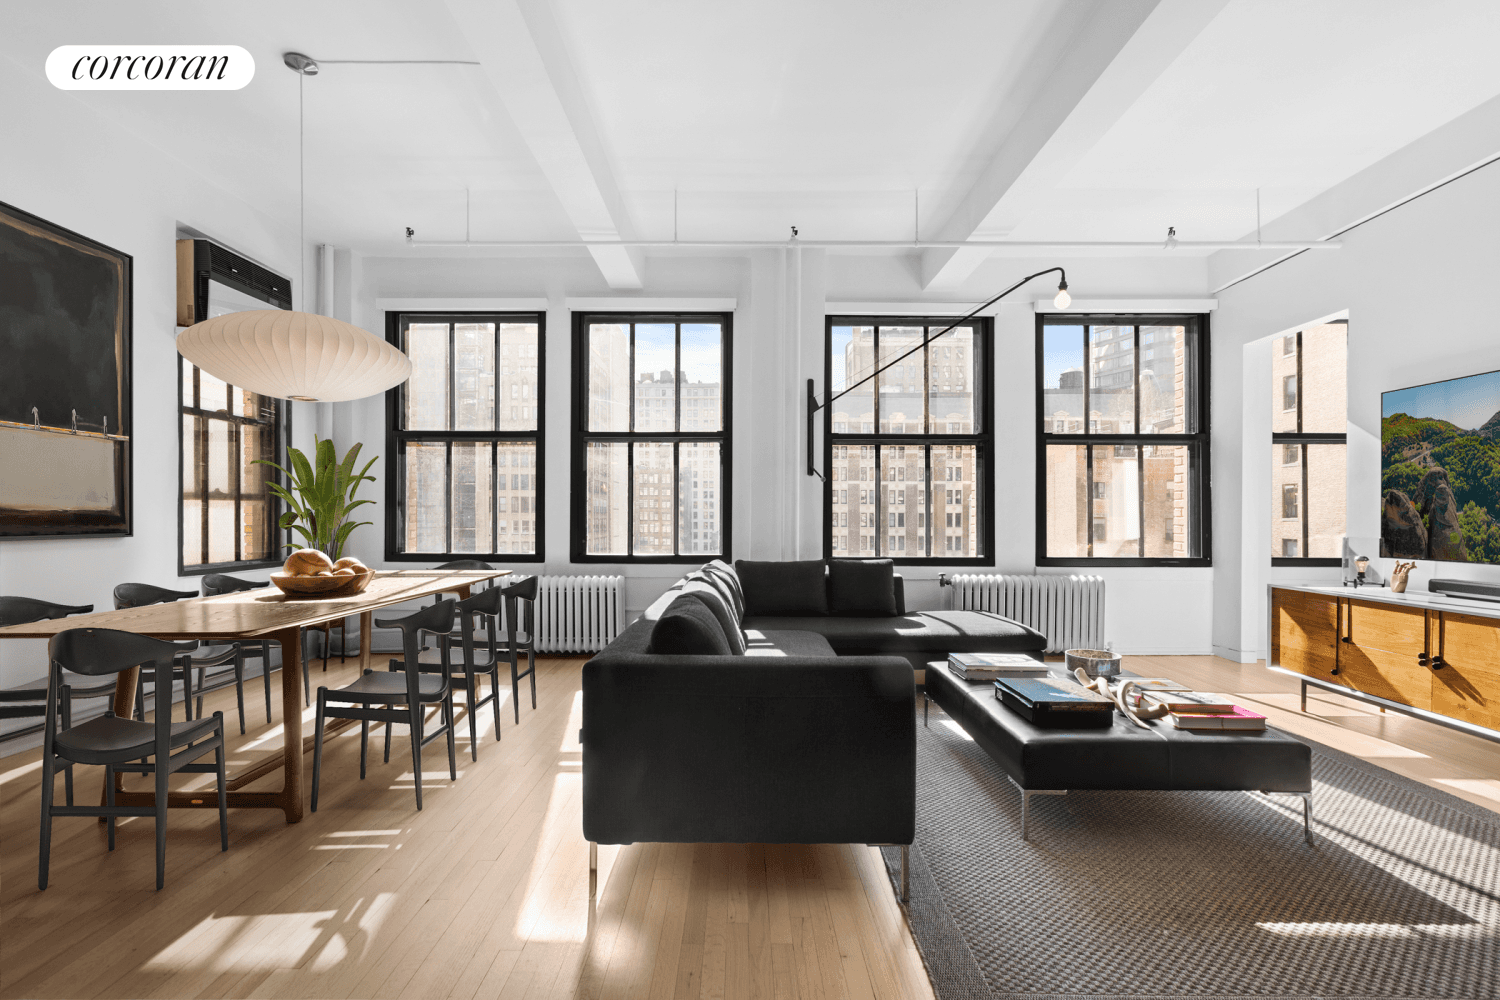 Welcome to 11 West 30th St, Apartment 9F, a bright and spacious loft warehouse conversion located in the vibrant Nomad neighborhood of Manhattan.